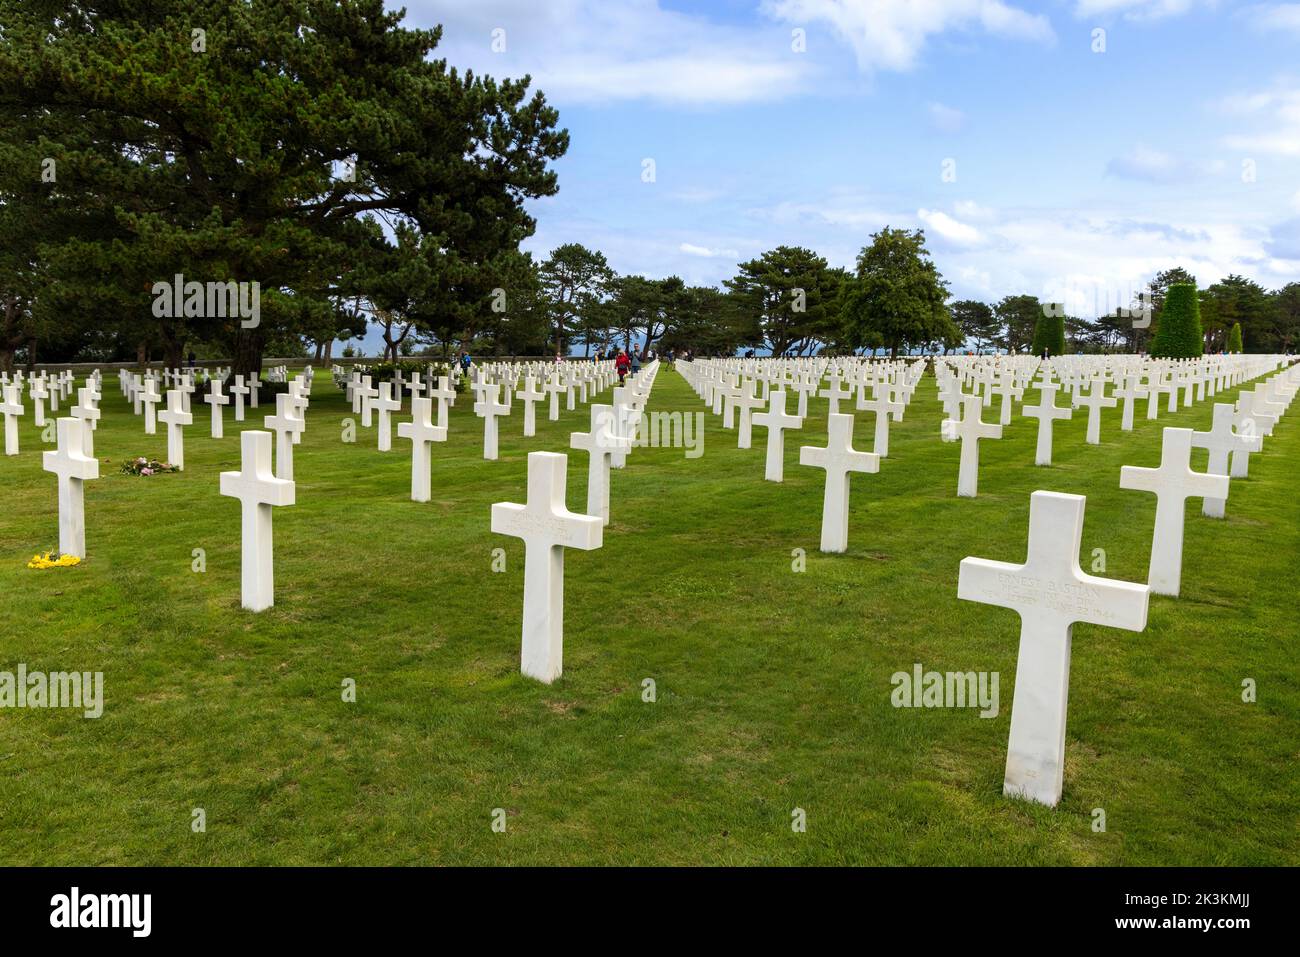 Rows of aligned headstones at the American War Cemetery, Omaha Beach, Colville-sur-Mer, Calvados, Normandy, France. Stock Photo